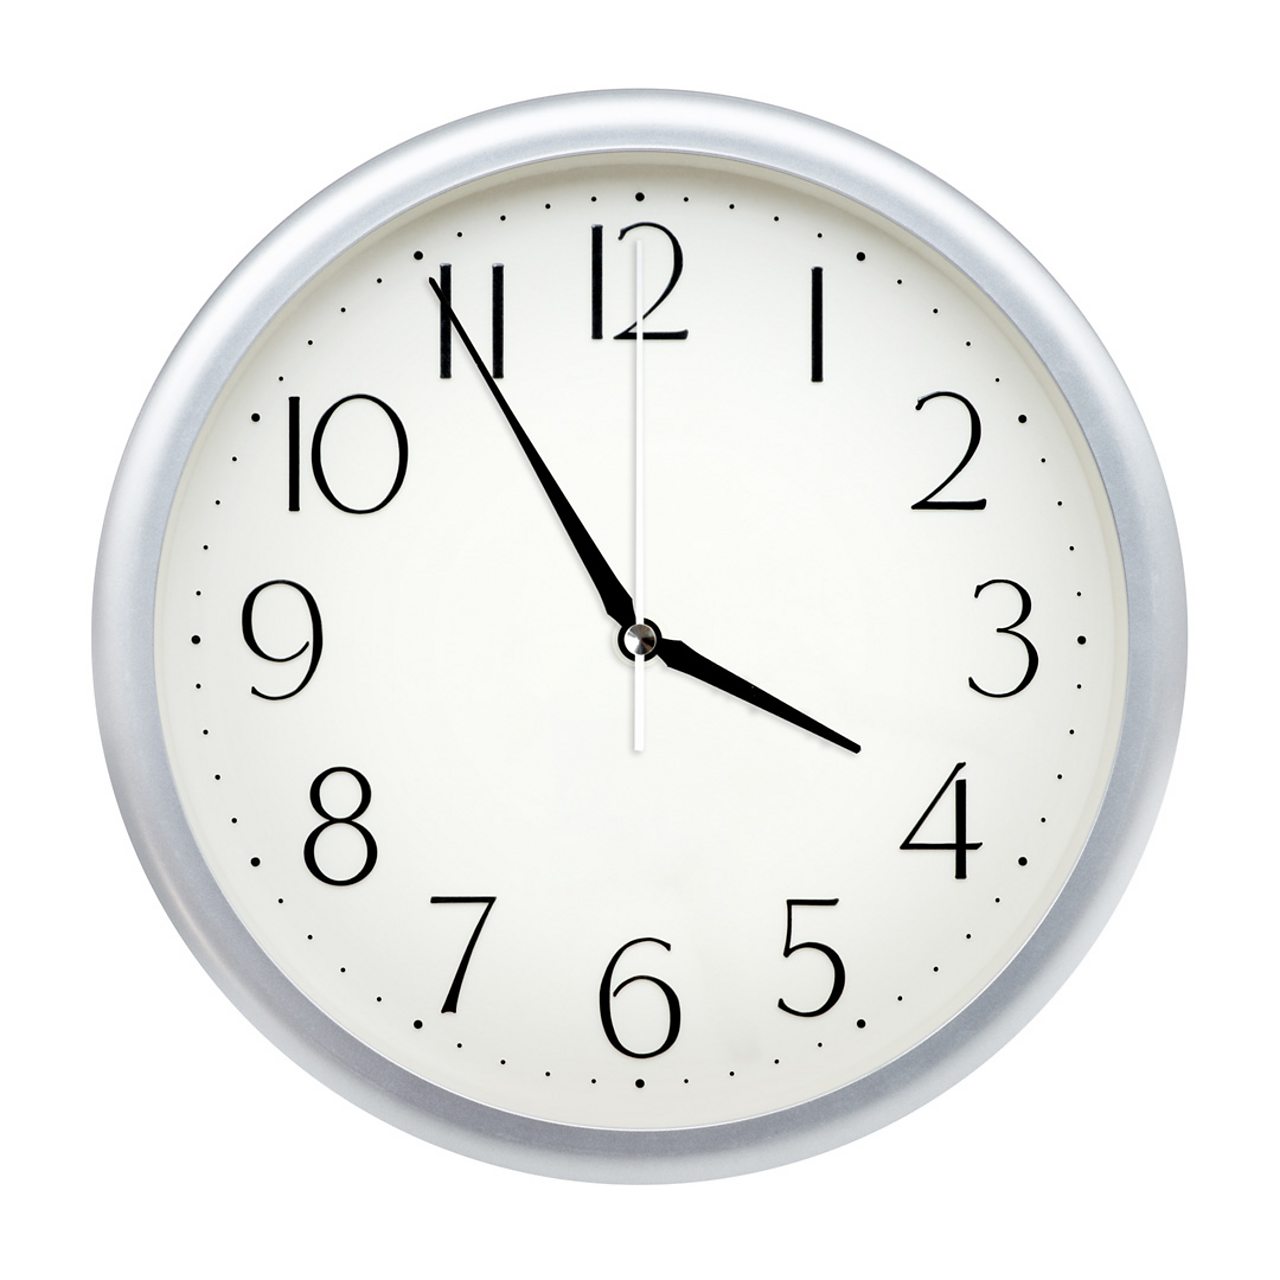 Image of a clock face showing 3.55